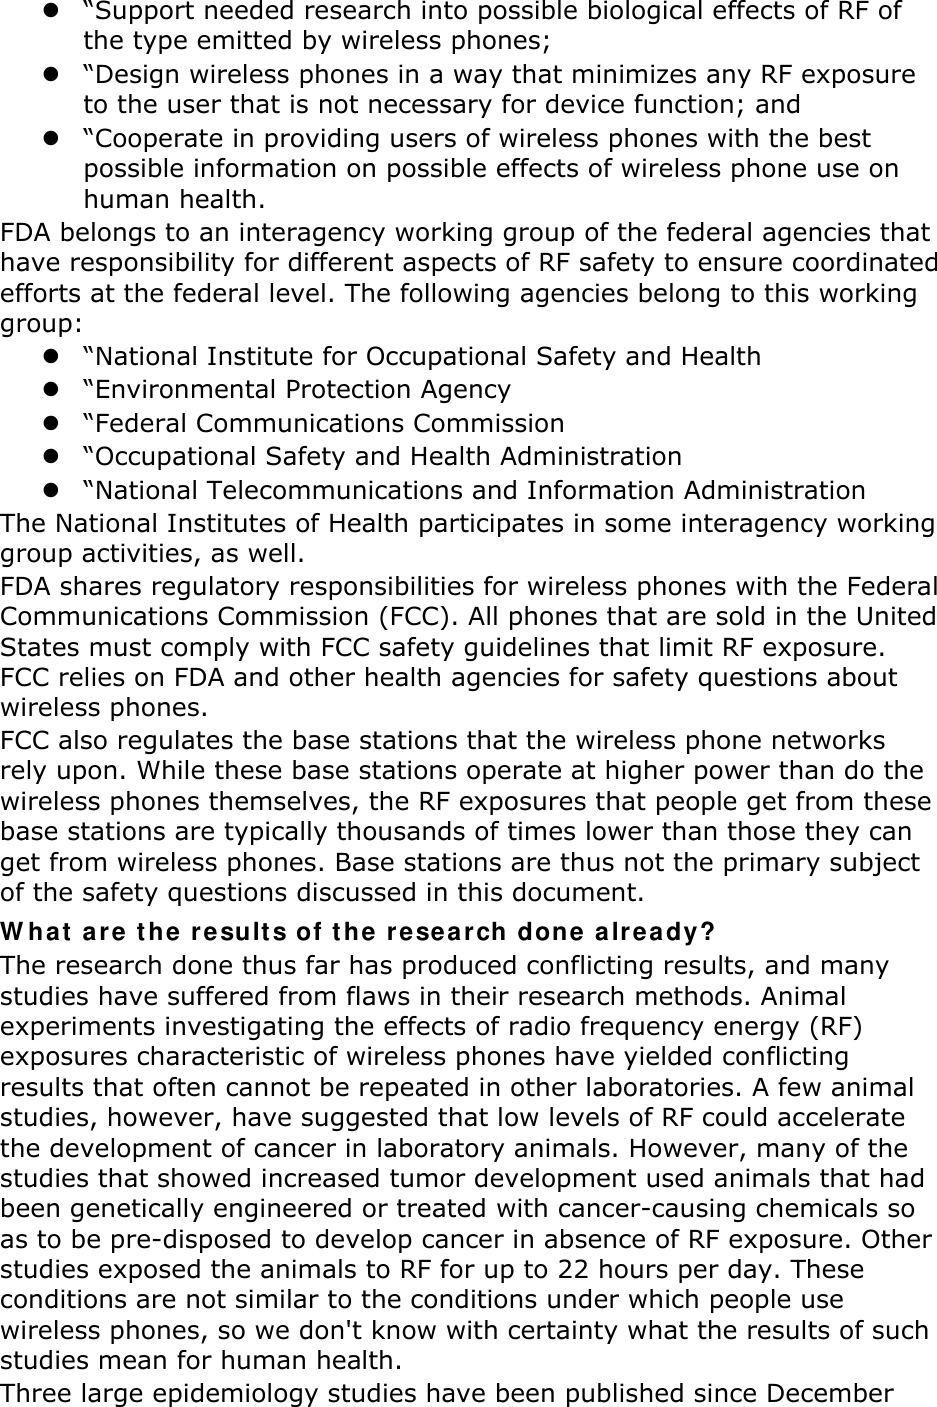  “Support needed research into possible biological effects of RF of the type emitted by wireless phones;  “Design wireless phones in a way that minimizes any RF exposure to the user that is not necessary for device function; and  “Cooperate in providing users of wireless phones with the best possible information on possible effects of wireless phone use on human health. FDA belongs to an interagency working group of the federal agencies that have responsibility for different aspects of RF safety to ensure coordinated efforts at the federal level. The following agencies belong to this working group:  “National Institute for Occupational Safety and Health  “Environmental Protection Agency  “Federal Communications Commission  “Occupational Safety and Health Administration  “National Telecommunications and Information Administration The National Institutes of Health participates in some interagency working group activities, as well. FDA shares regulatory responsibilities for wireless phones with the Federal Communications Commission (FCC). All phones that are sold in the United States must comply with FCC safety guidelines that limit RF exposure. FCC relies on FDA and other health agencies for safety questions about wireless phones. FCC also regulates the base stations that the wireless phone networks rely upon. While these base stations operate at higher power than do the wireless phones themselves, the RF exposures that people get from these base stations are typically thousands of times lower than those they can get from wireless phones. Base stations are thus not the primary subject of the safety questions discussed in this document. W ha t  a r e  t he r e sult s of t he r e search done a lr e a dy? The research done thus far has produced conflicting results, and many studies have suffered from flaws in their research methods. Animal experiments investigating the effects of radio frequency energy (RF) exposures characteristic of wireless phones have yielded conflicting results that often cannot be repeated in other laboratories. A few animal studies, however, have suggested that low levels of RF could accelerate the development of cancer in laboratory animals. However, many of the studies that showed increased tumor development used animals that had been genetically engineered or treated with cancer-causing chemicals so as to be pre-disposed to develop cancer in absence of RF exposure. Other studies exposed the animals to RF for up to 22 hours per day. These conditions are not similar to the conditions under which people use wireless phones, so we don&apos;t know with certainty what the results of such studies mean for human health. Three large epidemiology studies have been published since December 